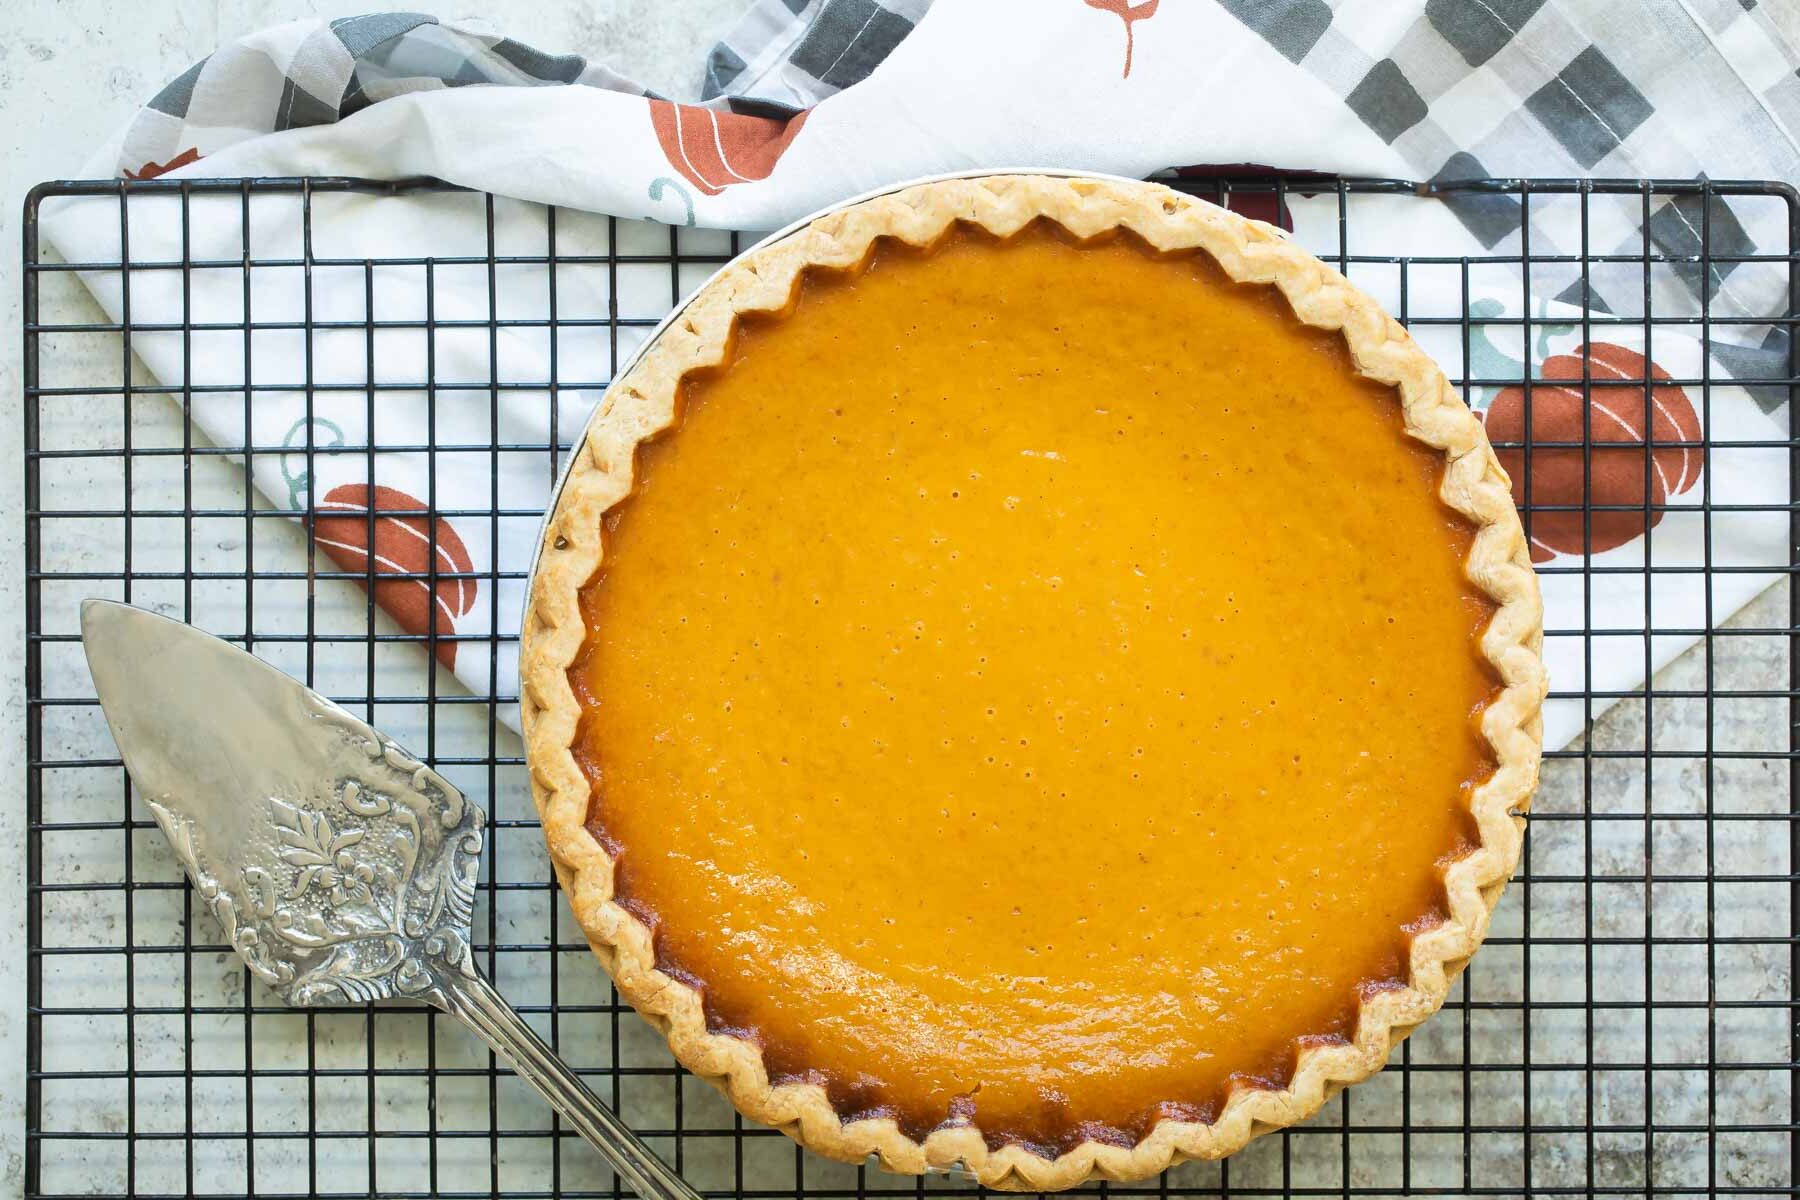 A baked pumpkin pie cooling on a wire rack.